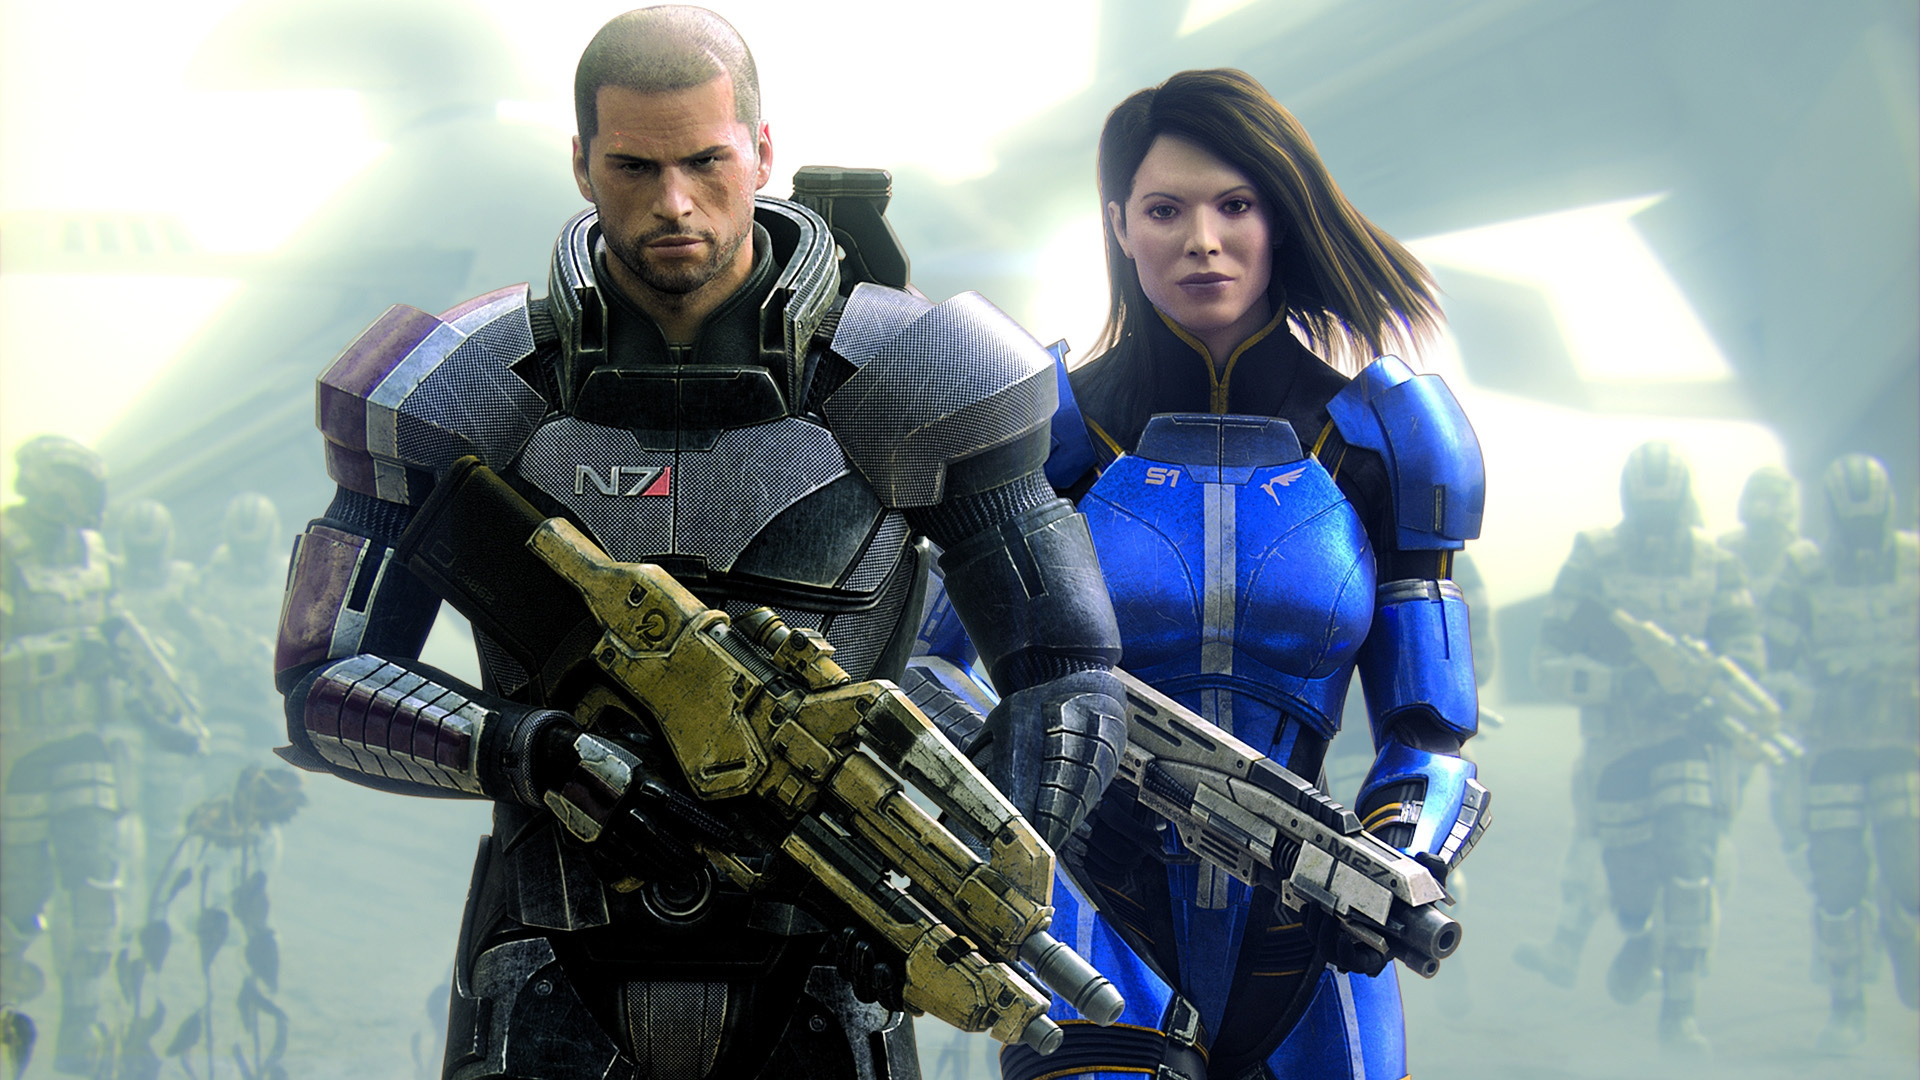 mass effect live wallpaper,action film,movie,fictional character,personal protective equipment,action figure